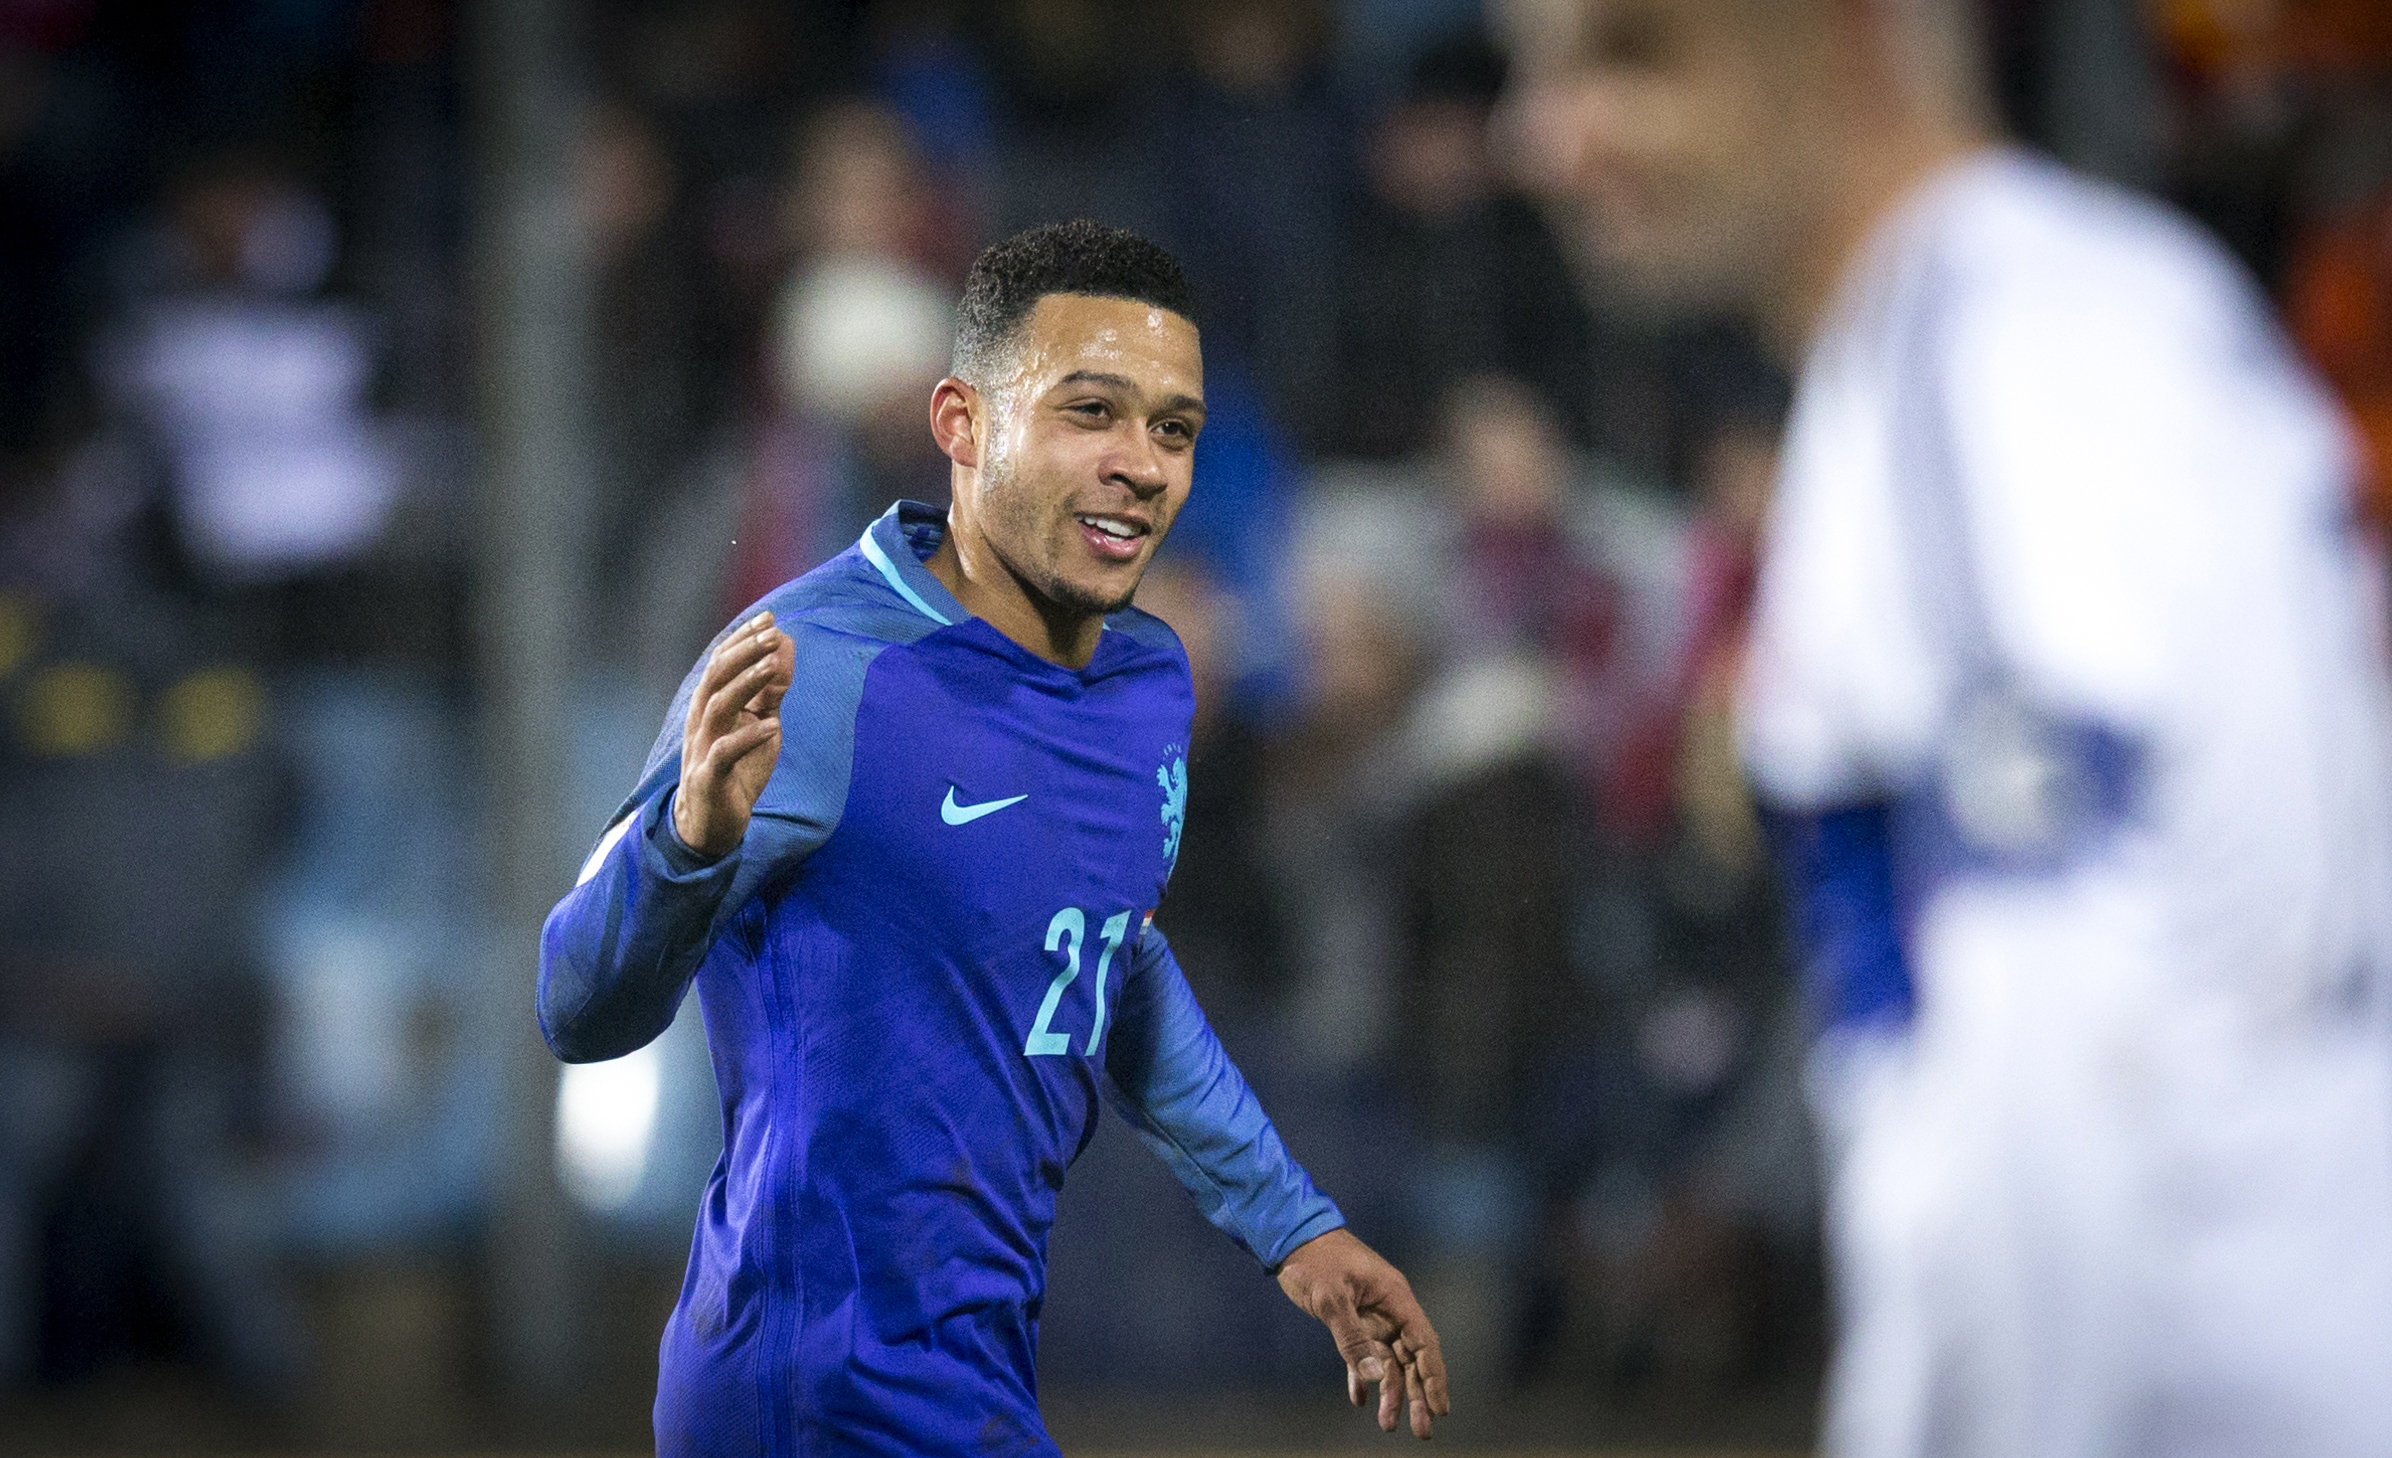 Netherlands' midfielder Memphis Depay celebrates after scoring a goal during the 2018 FIFA World Cup European zone group A qualifying football match between Luxembourg and Netherlands at the Josy Barthel stadium in Luxembourg on November 13, 2016. / AFP / ANP / Jerry Lampen / Netherlands OUT        (Photo credit should read JERRY LAMPEN/AFP/Getty Images)